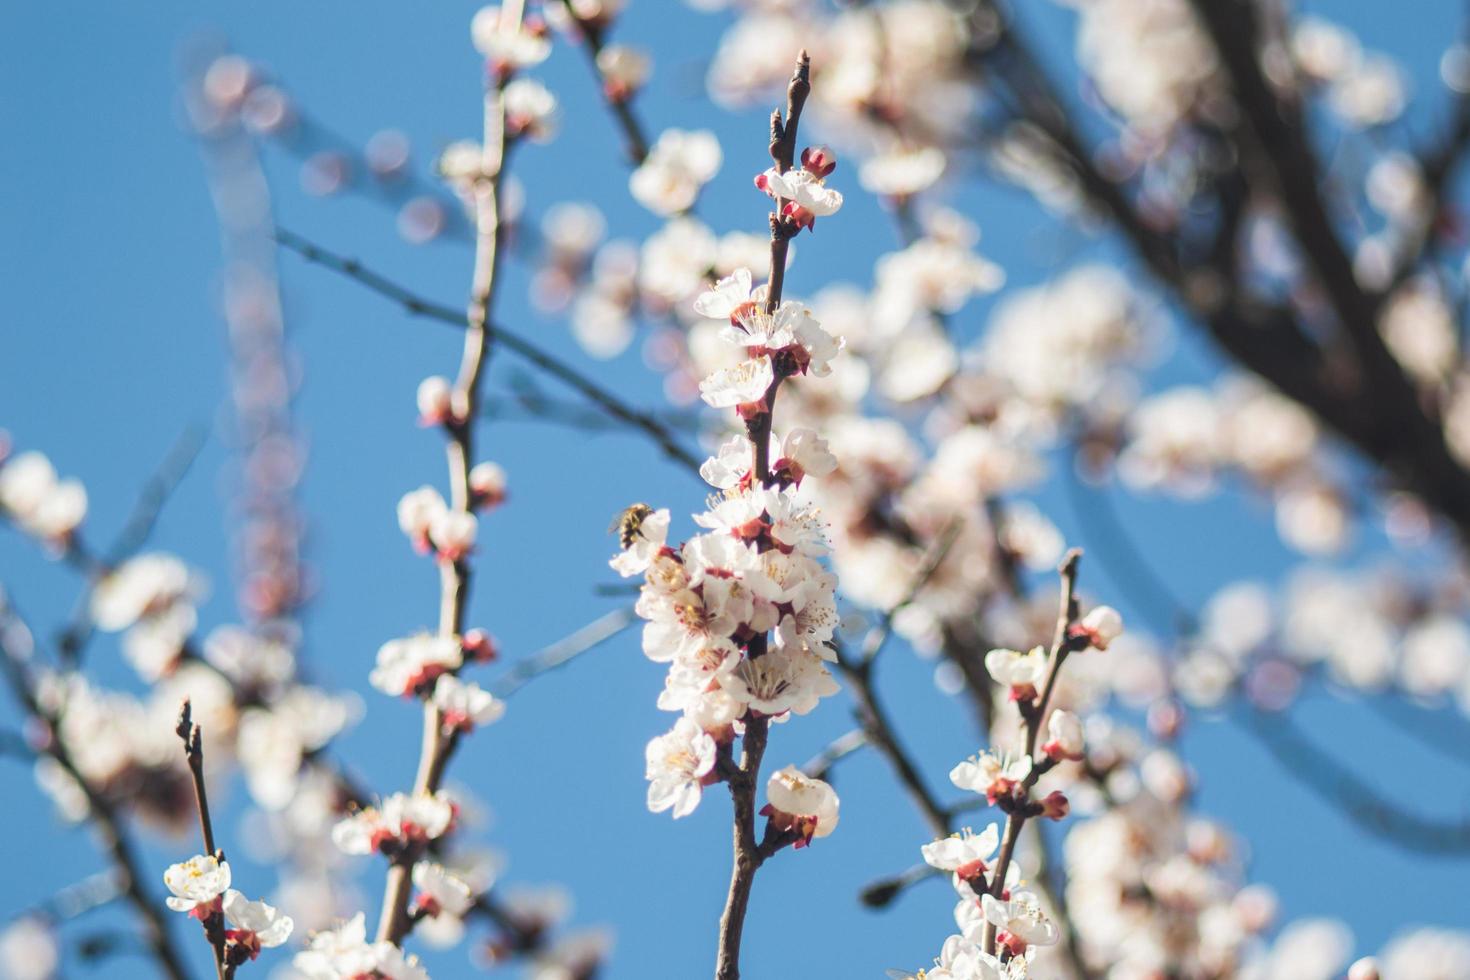 Apricot flowers with white and red petals photo